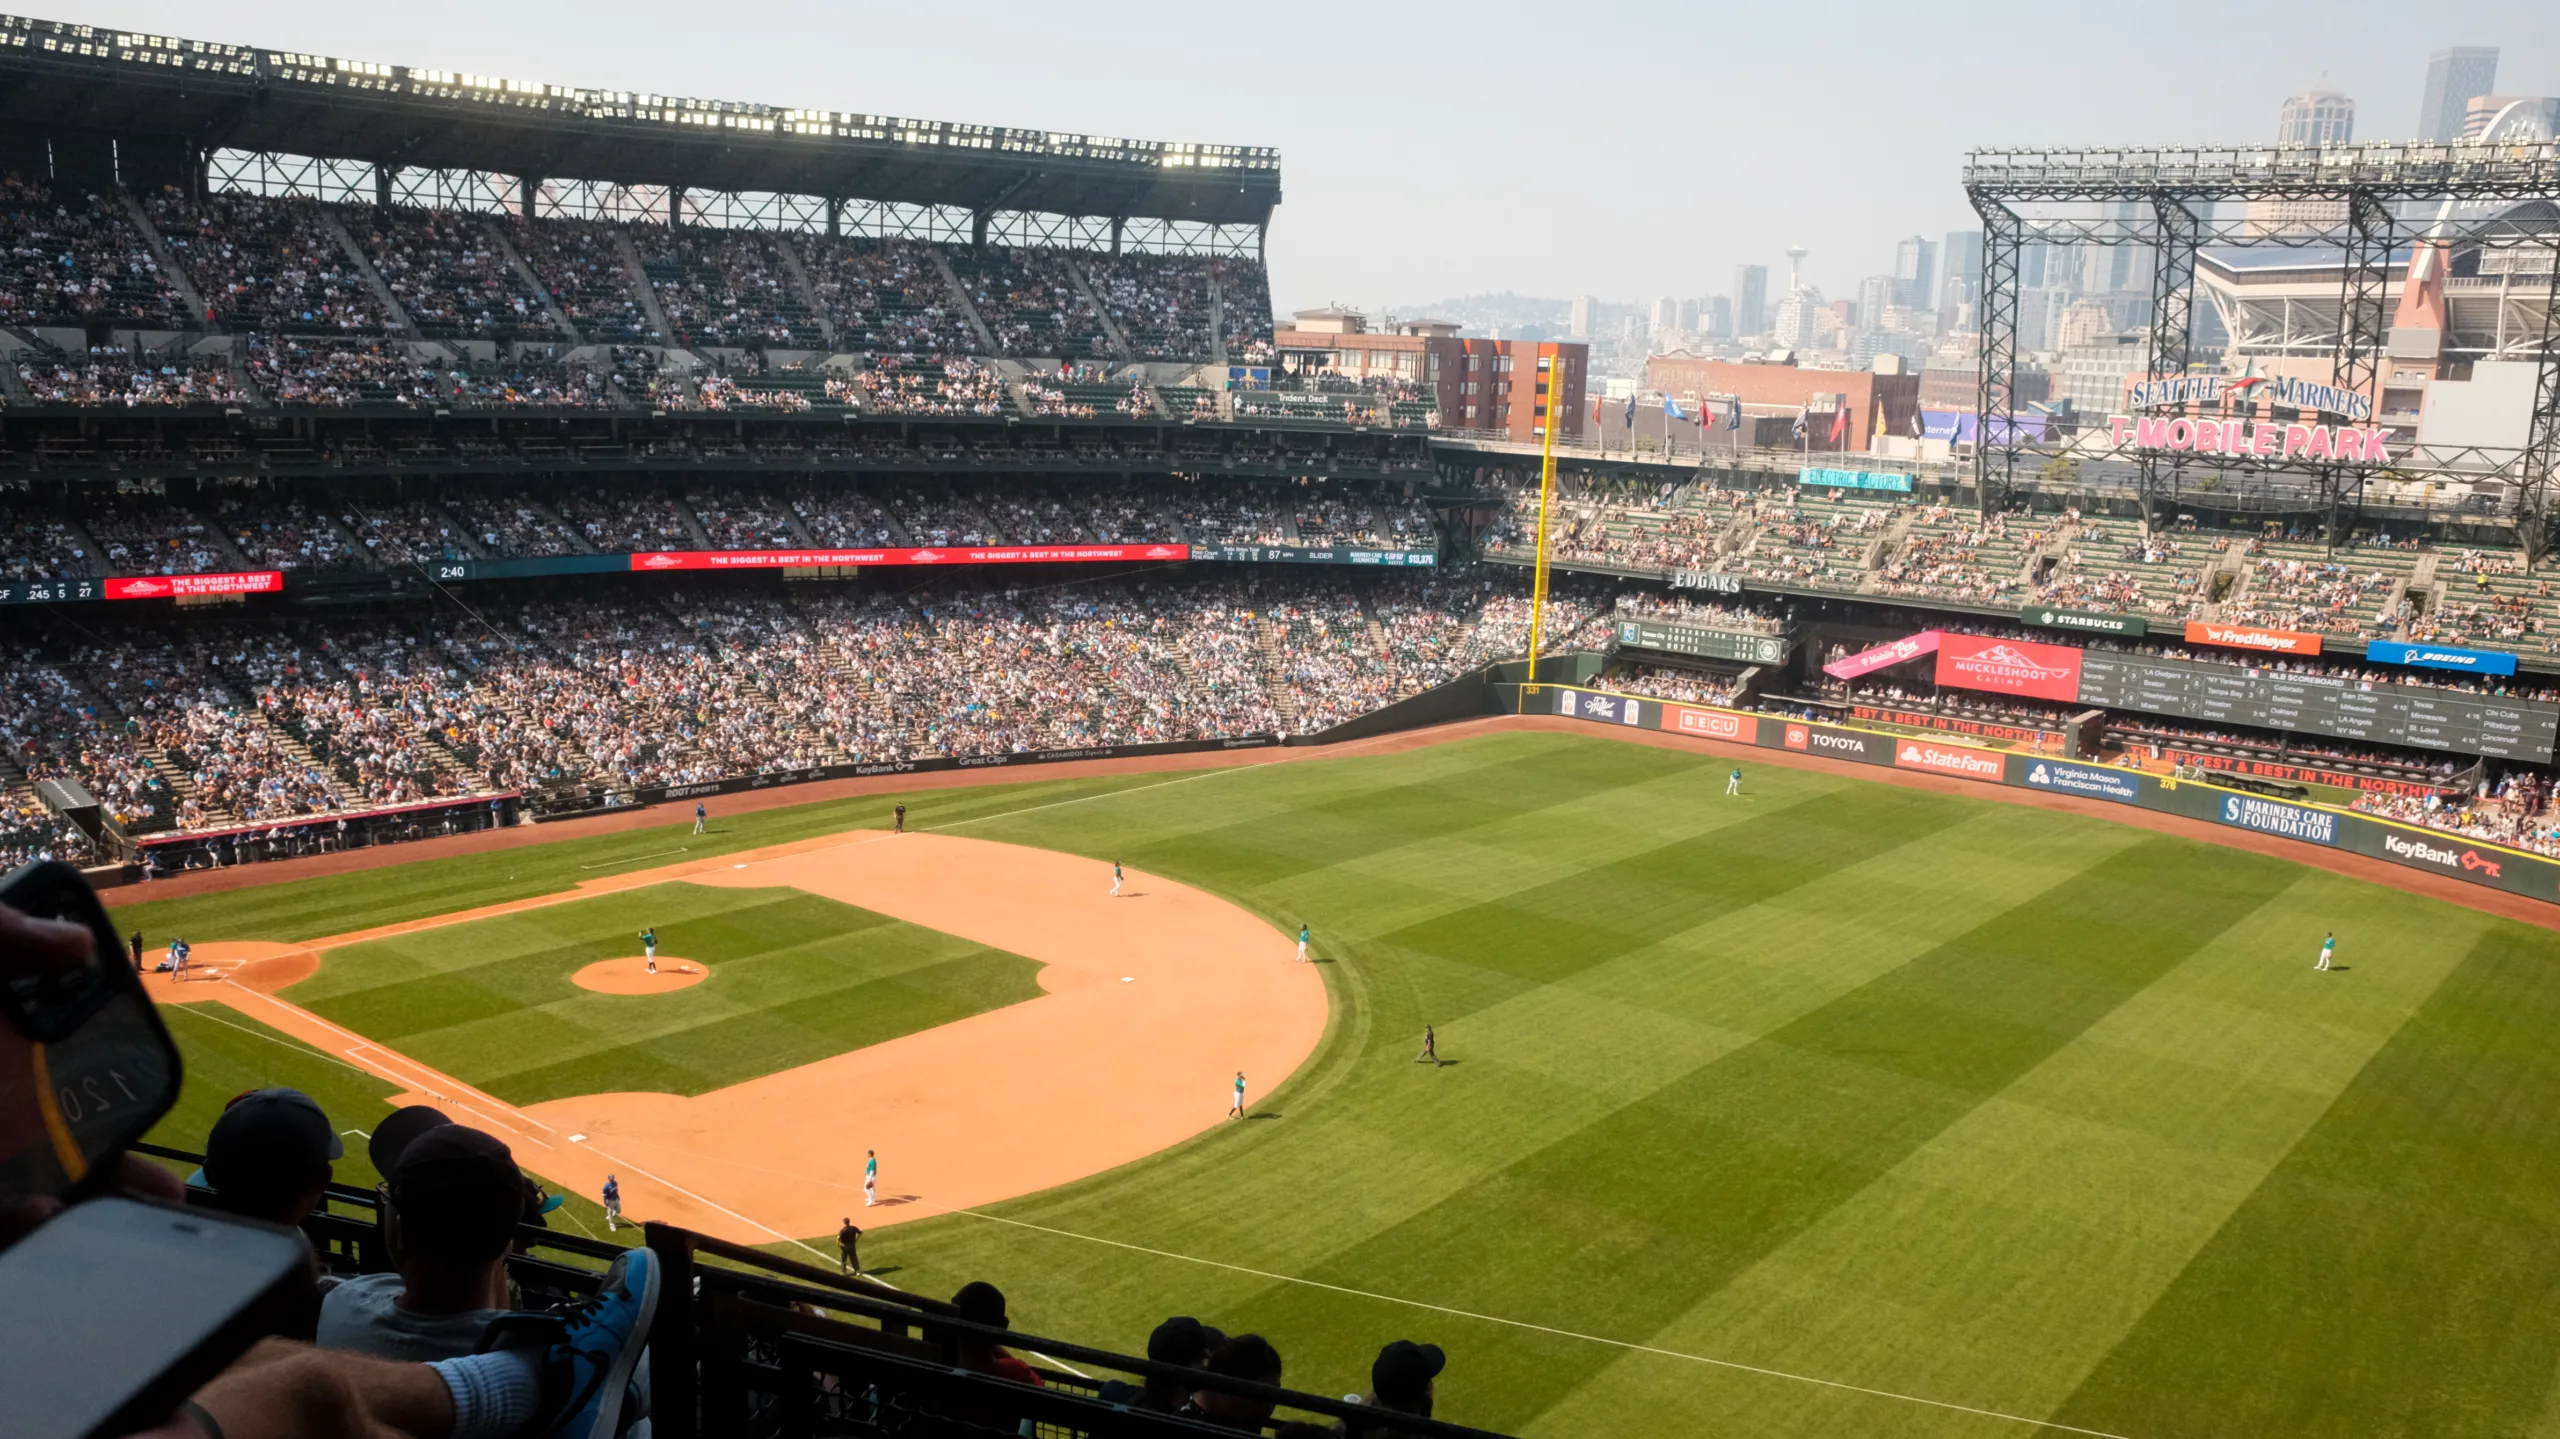 T-Mobile Park during a summertime Mariners game in Seattle, Washington.